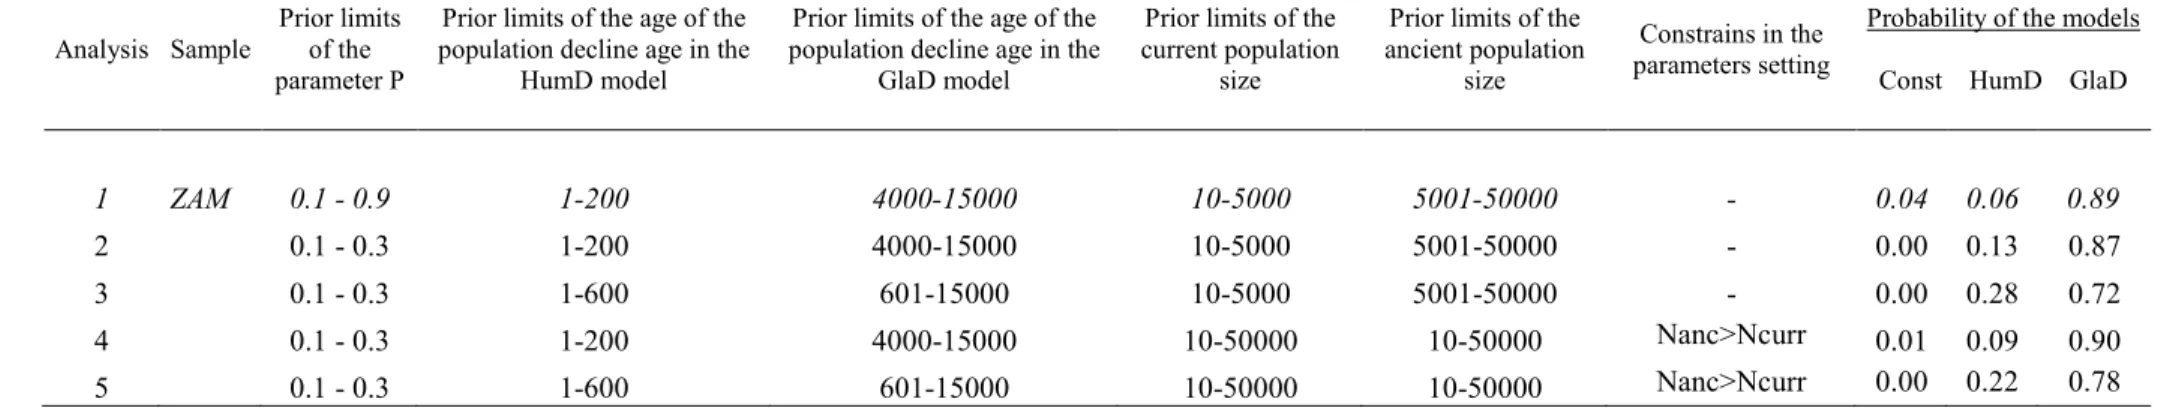 Table S1.1. Parameters setting for the prior distributions used in MSVAR.  All values are log-10 transformed, and the age is in years